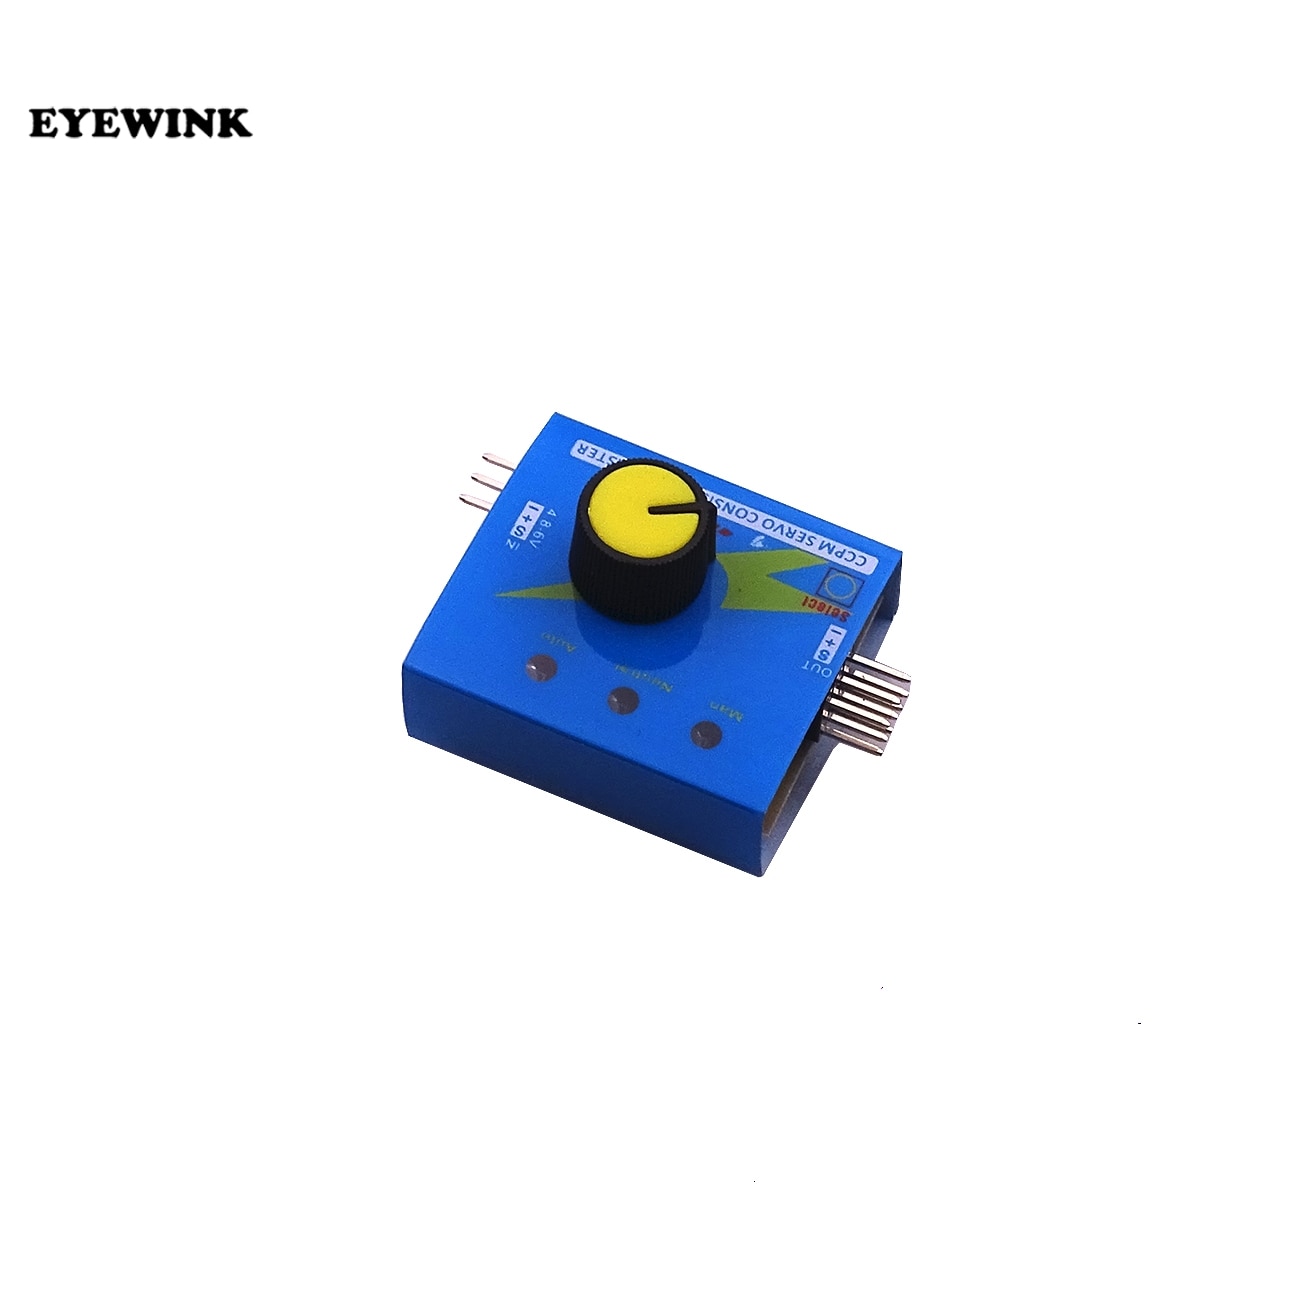 DC 12V 30A High-Power Brushless Motor Speed Controller DC 3-phase Regulator PWM Brushless Motor Speed Controller Drive